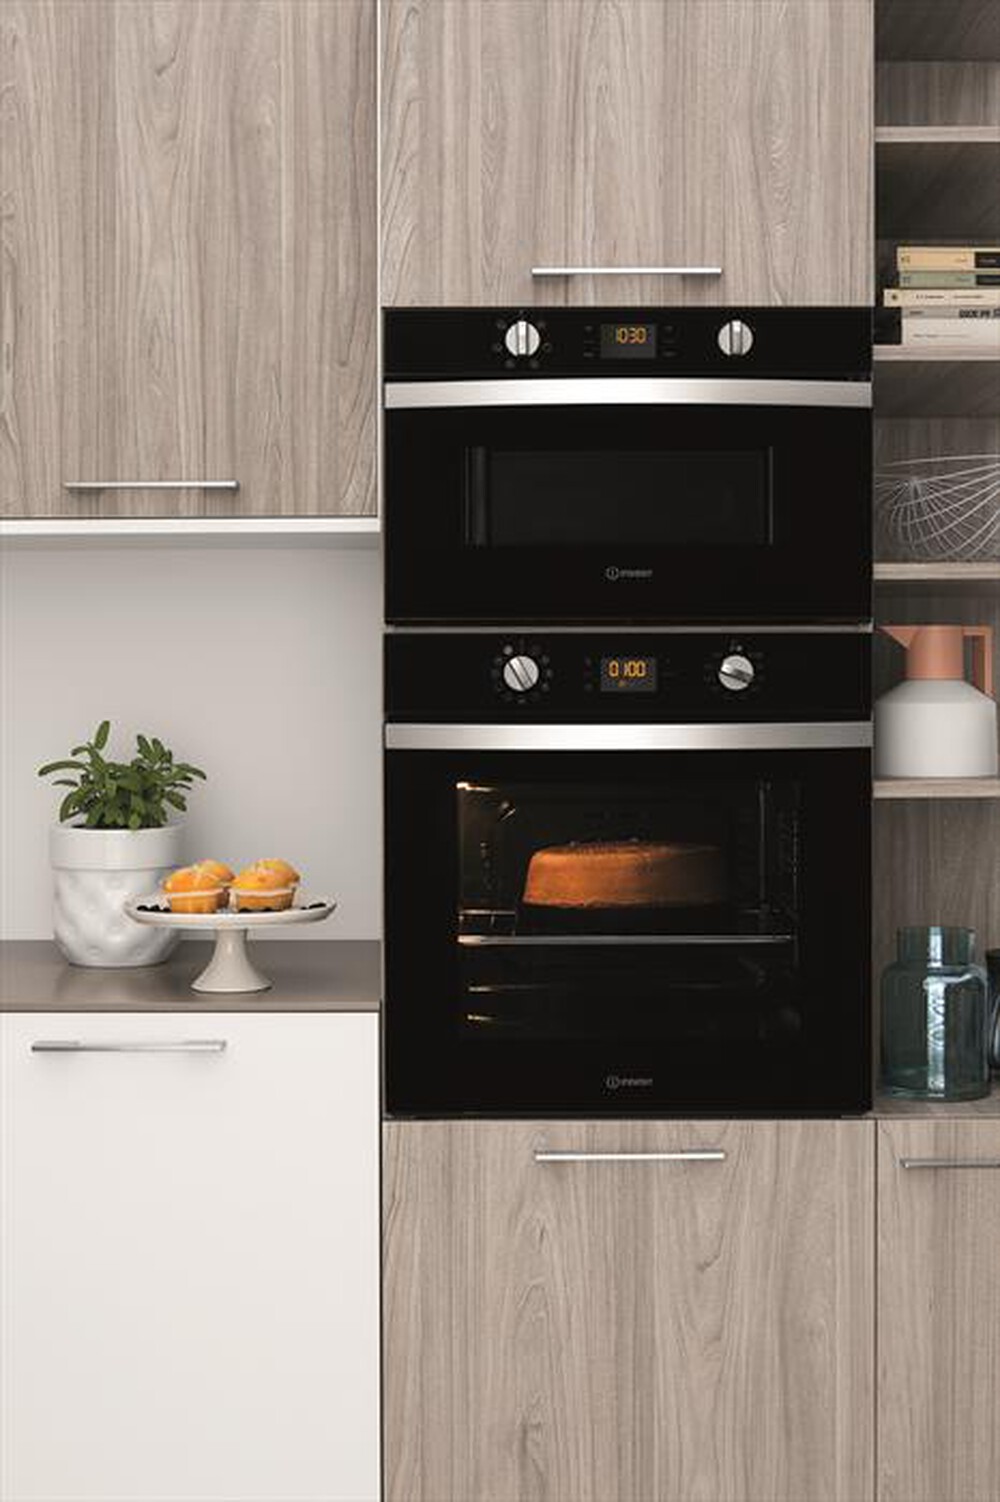 "INDESIT - Forno incasso elettrico IFW 4844 H BL Classe A+"